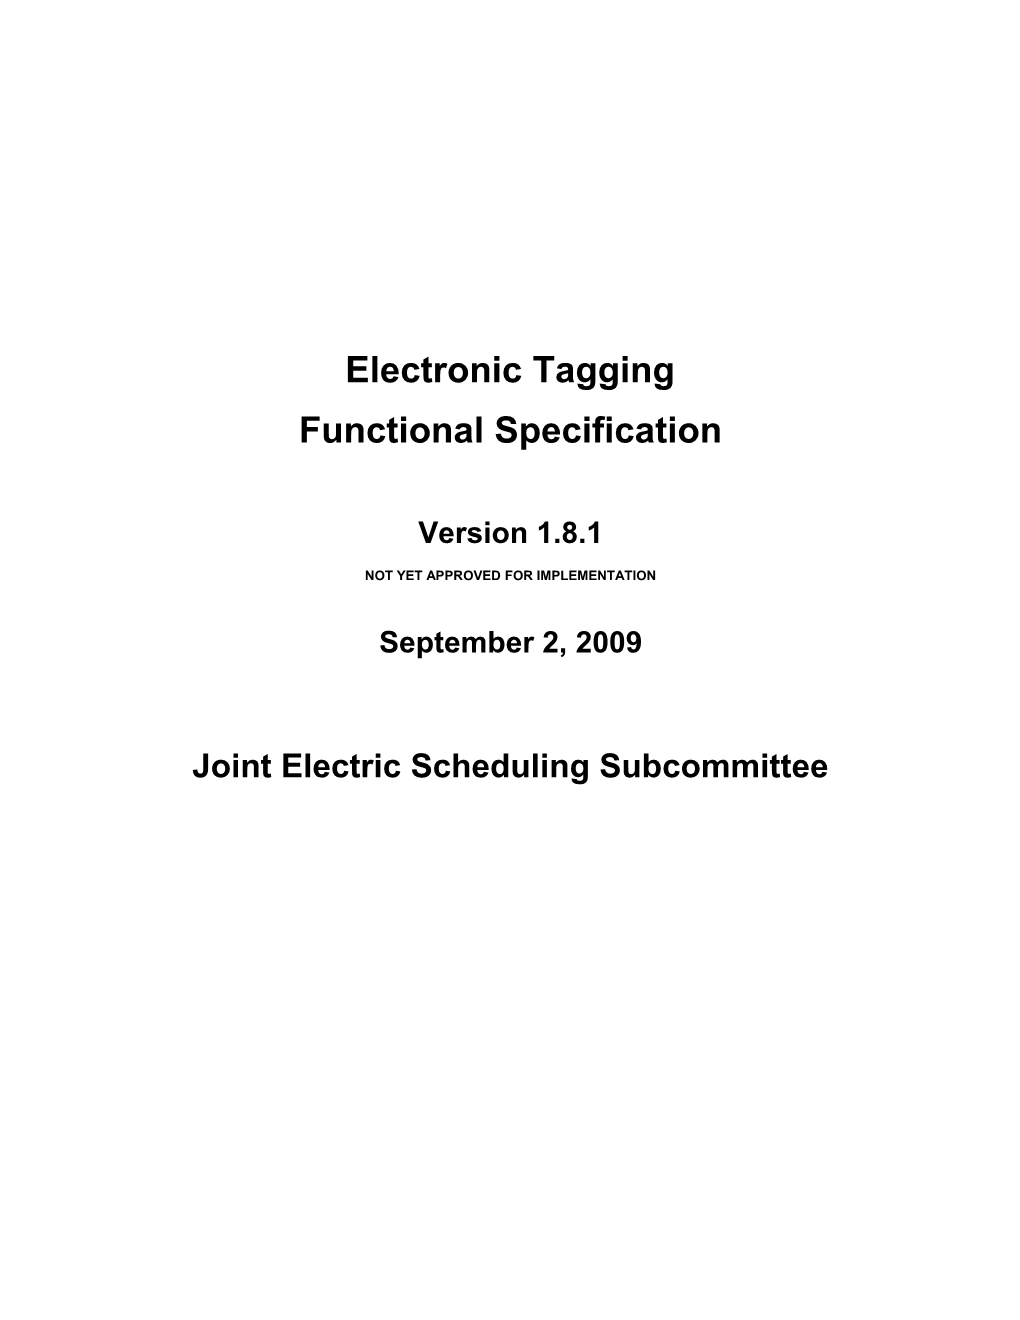 Electronic Tagging Functional Specifications